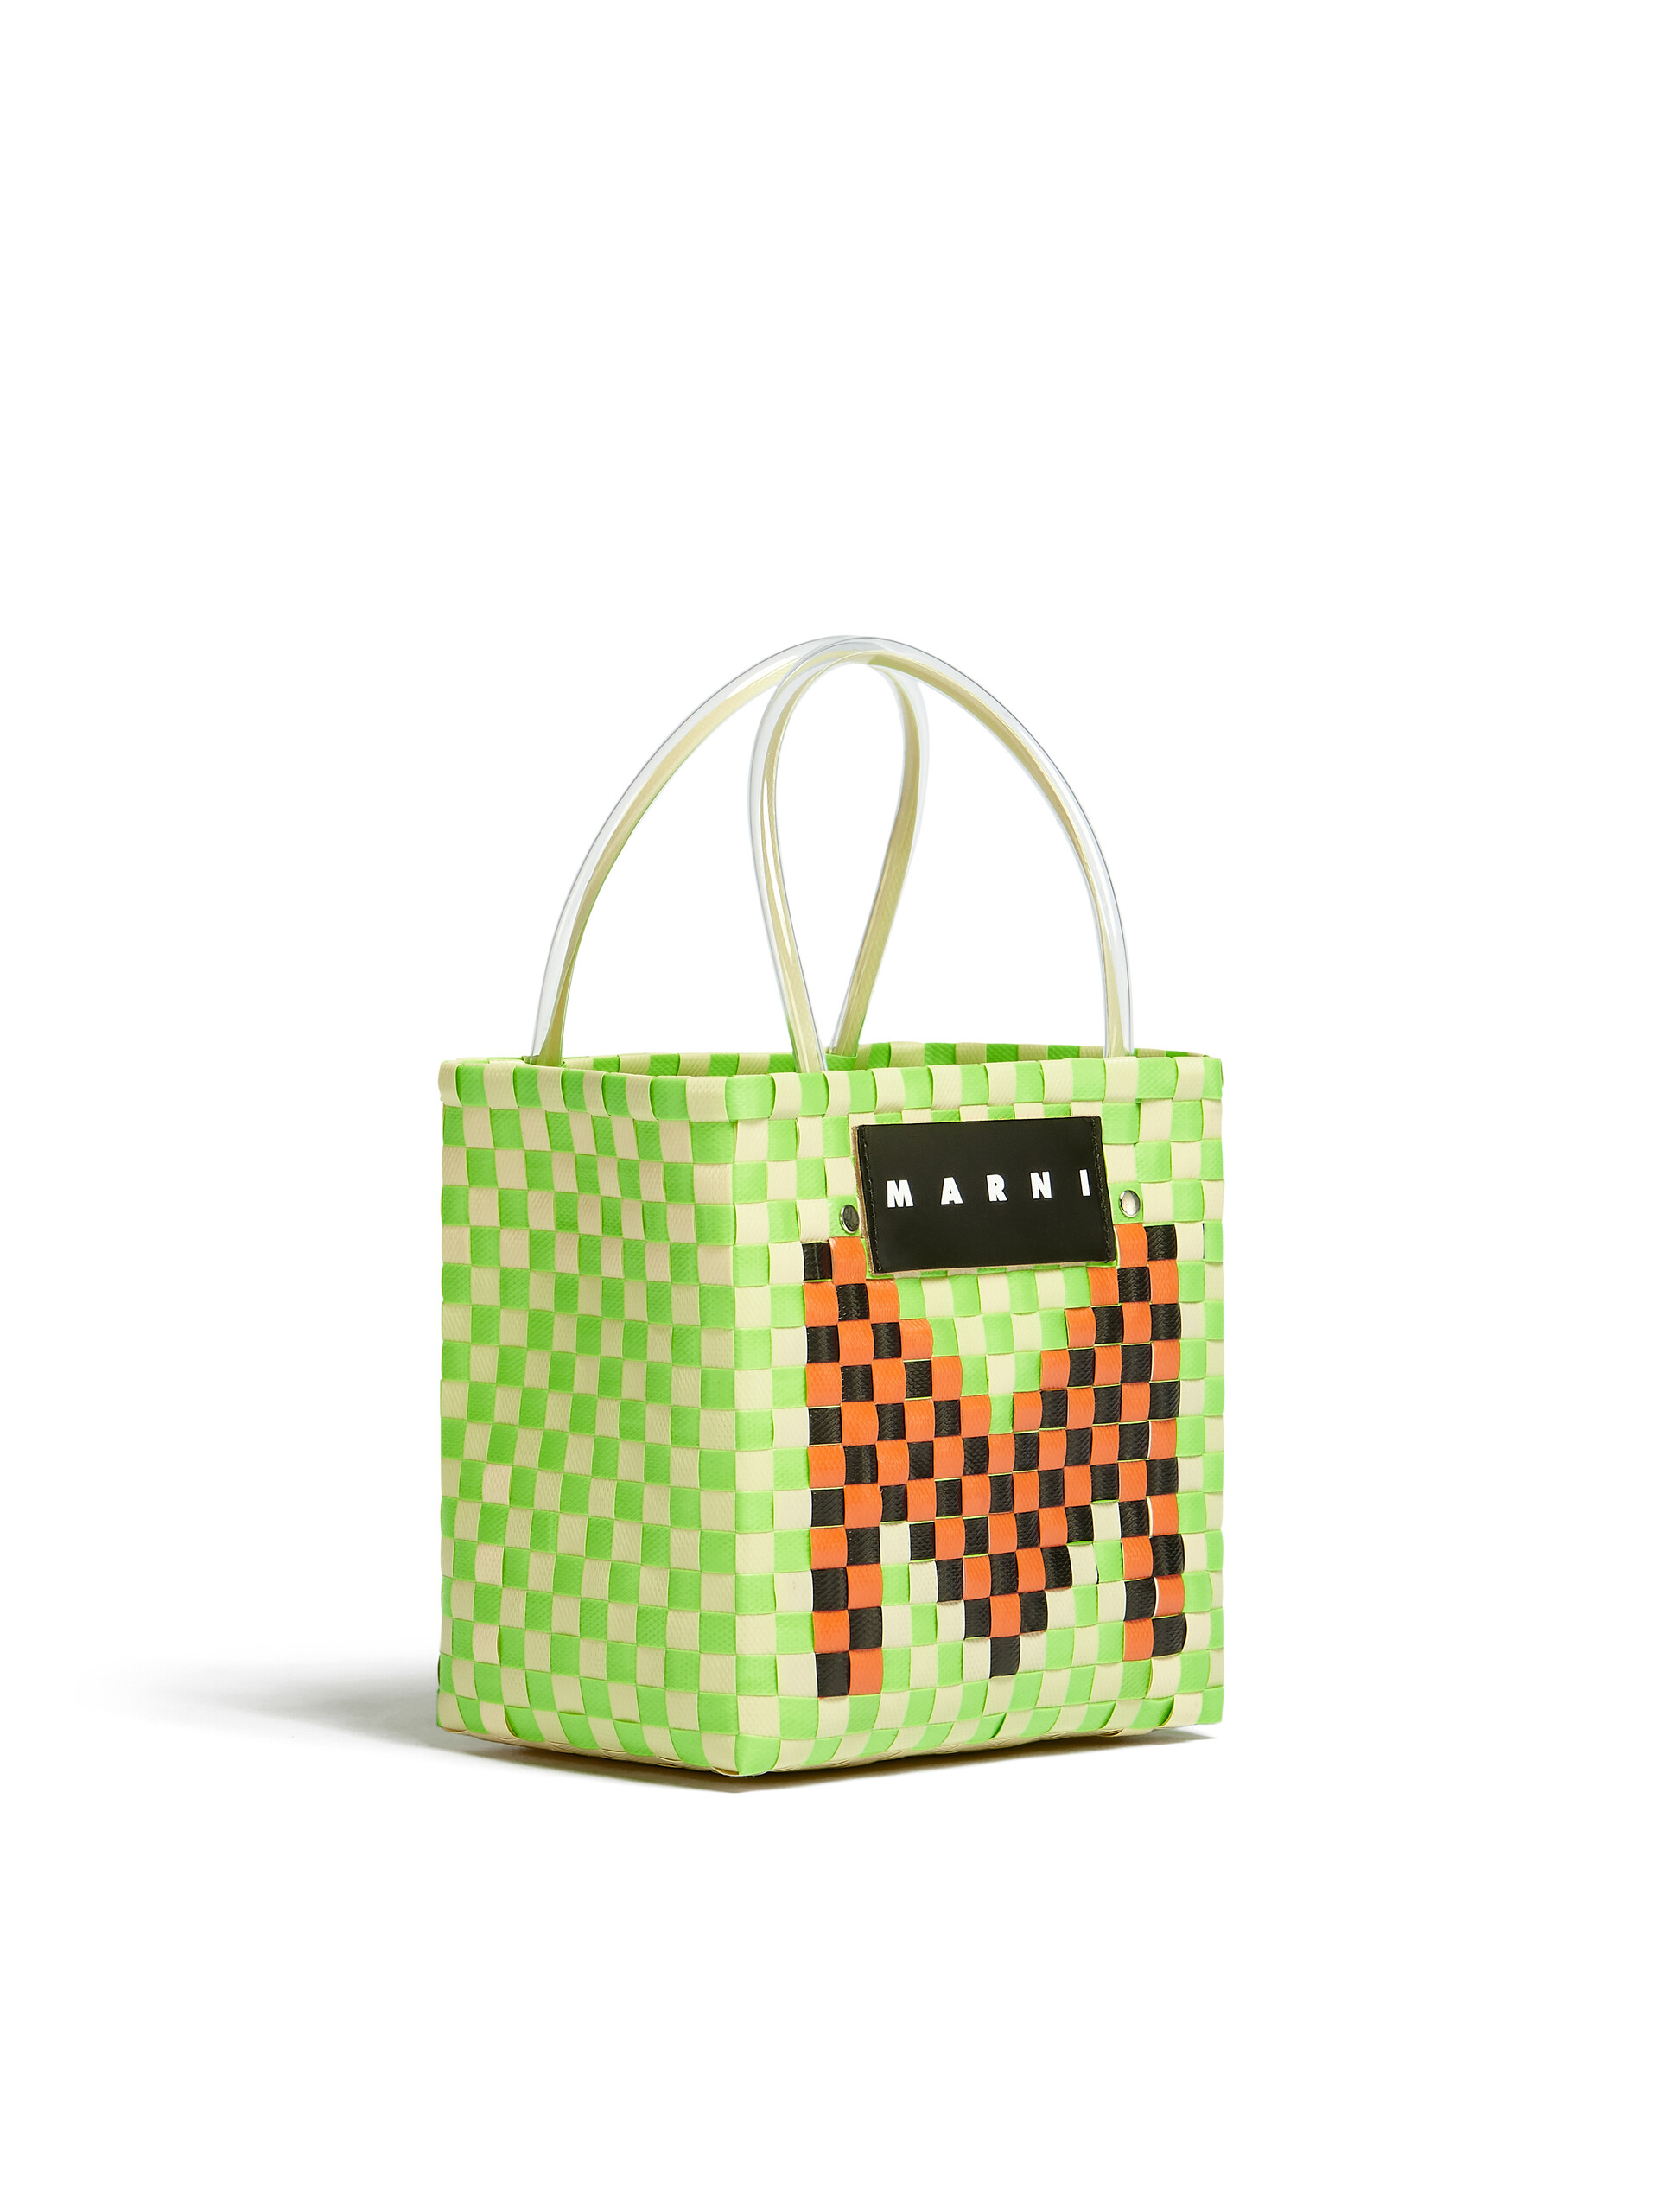 MARNI MARKET shopping bag in green woven material with M logo - Bags - Image 2